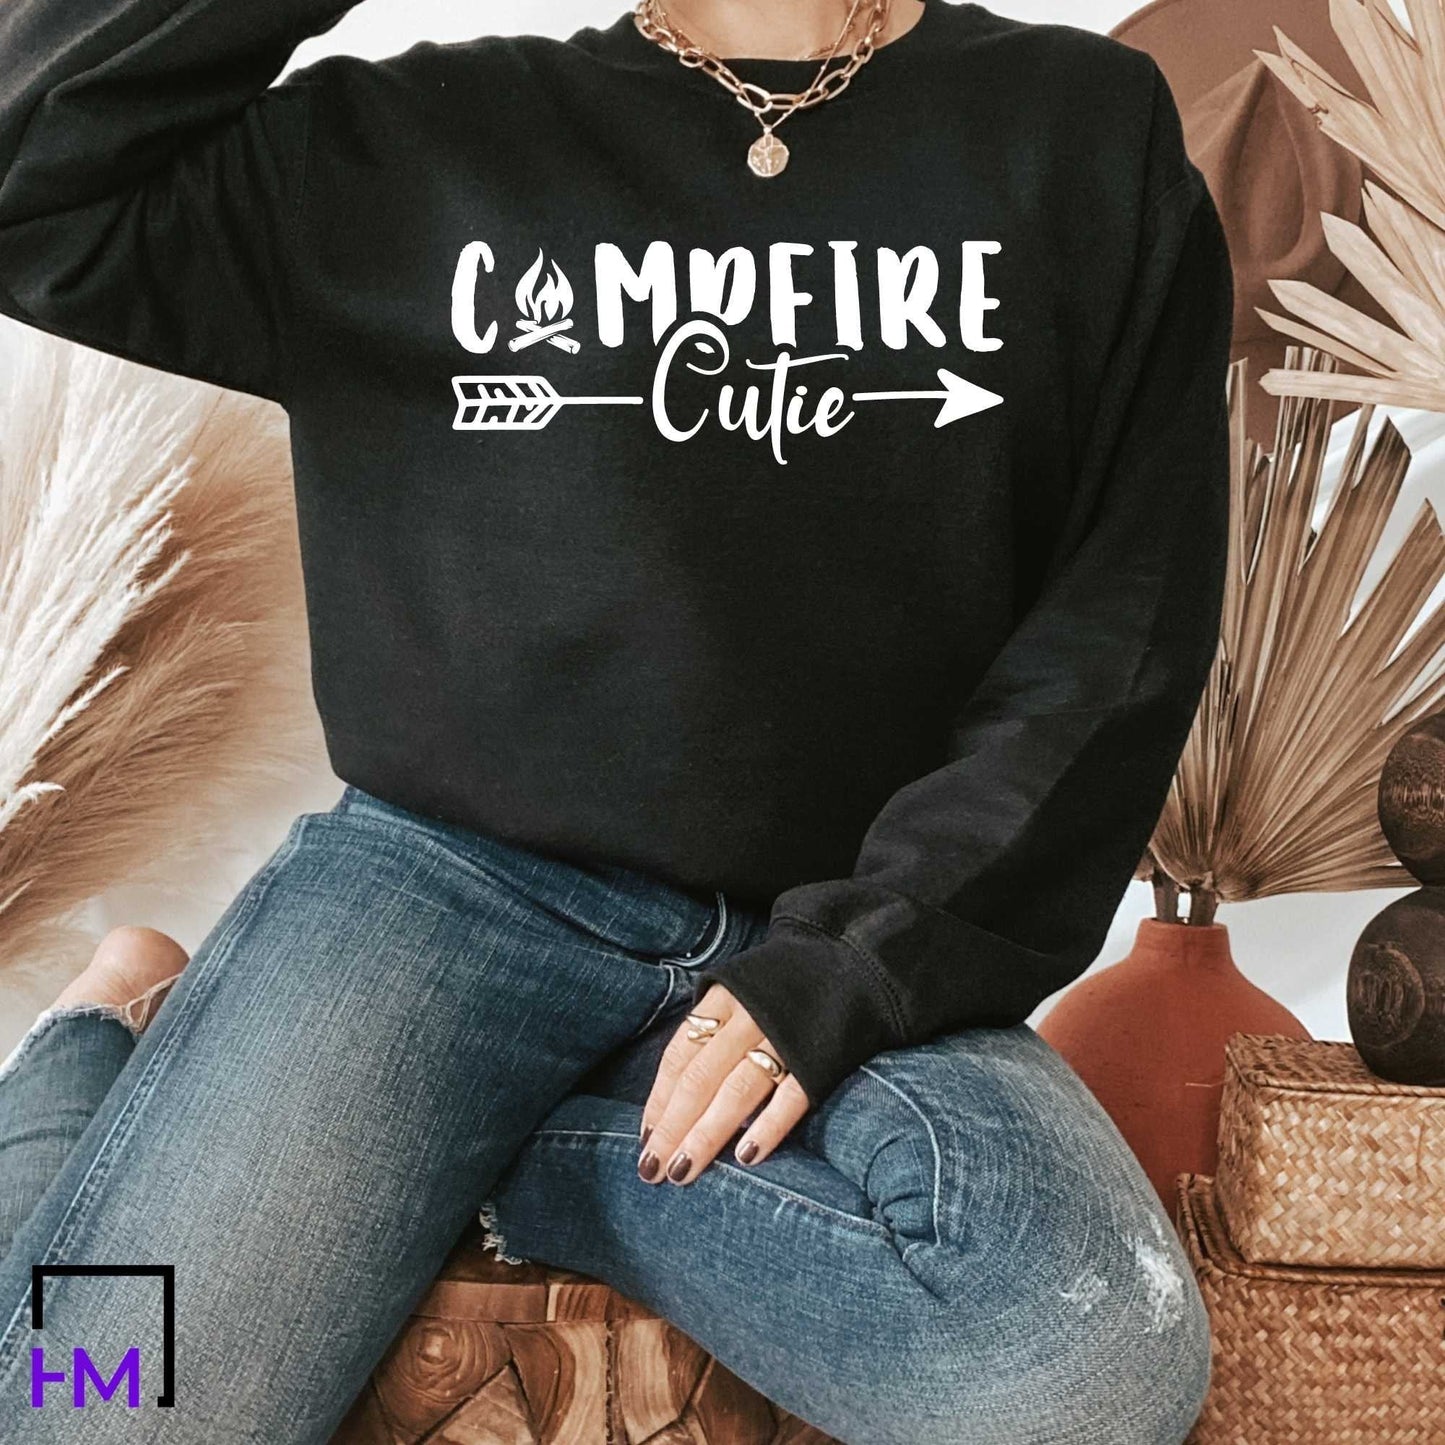 Campfire Cutie, Happy Camper Shirt, Adventure Time Gift, Camper Gifts for Women, Nature Lover Sweatshirt, Camping Presents, Hiking Tee HMDesignStudioUS